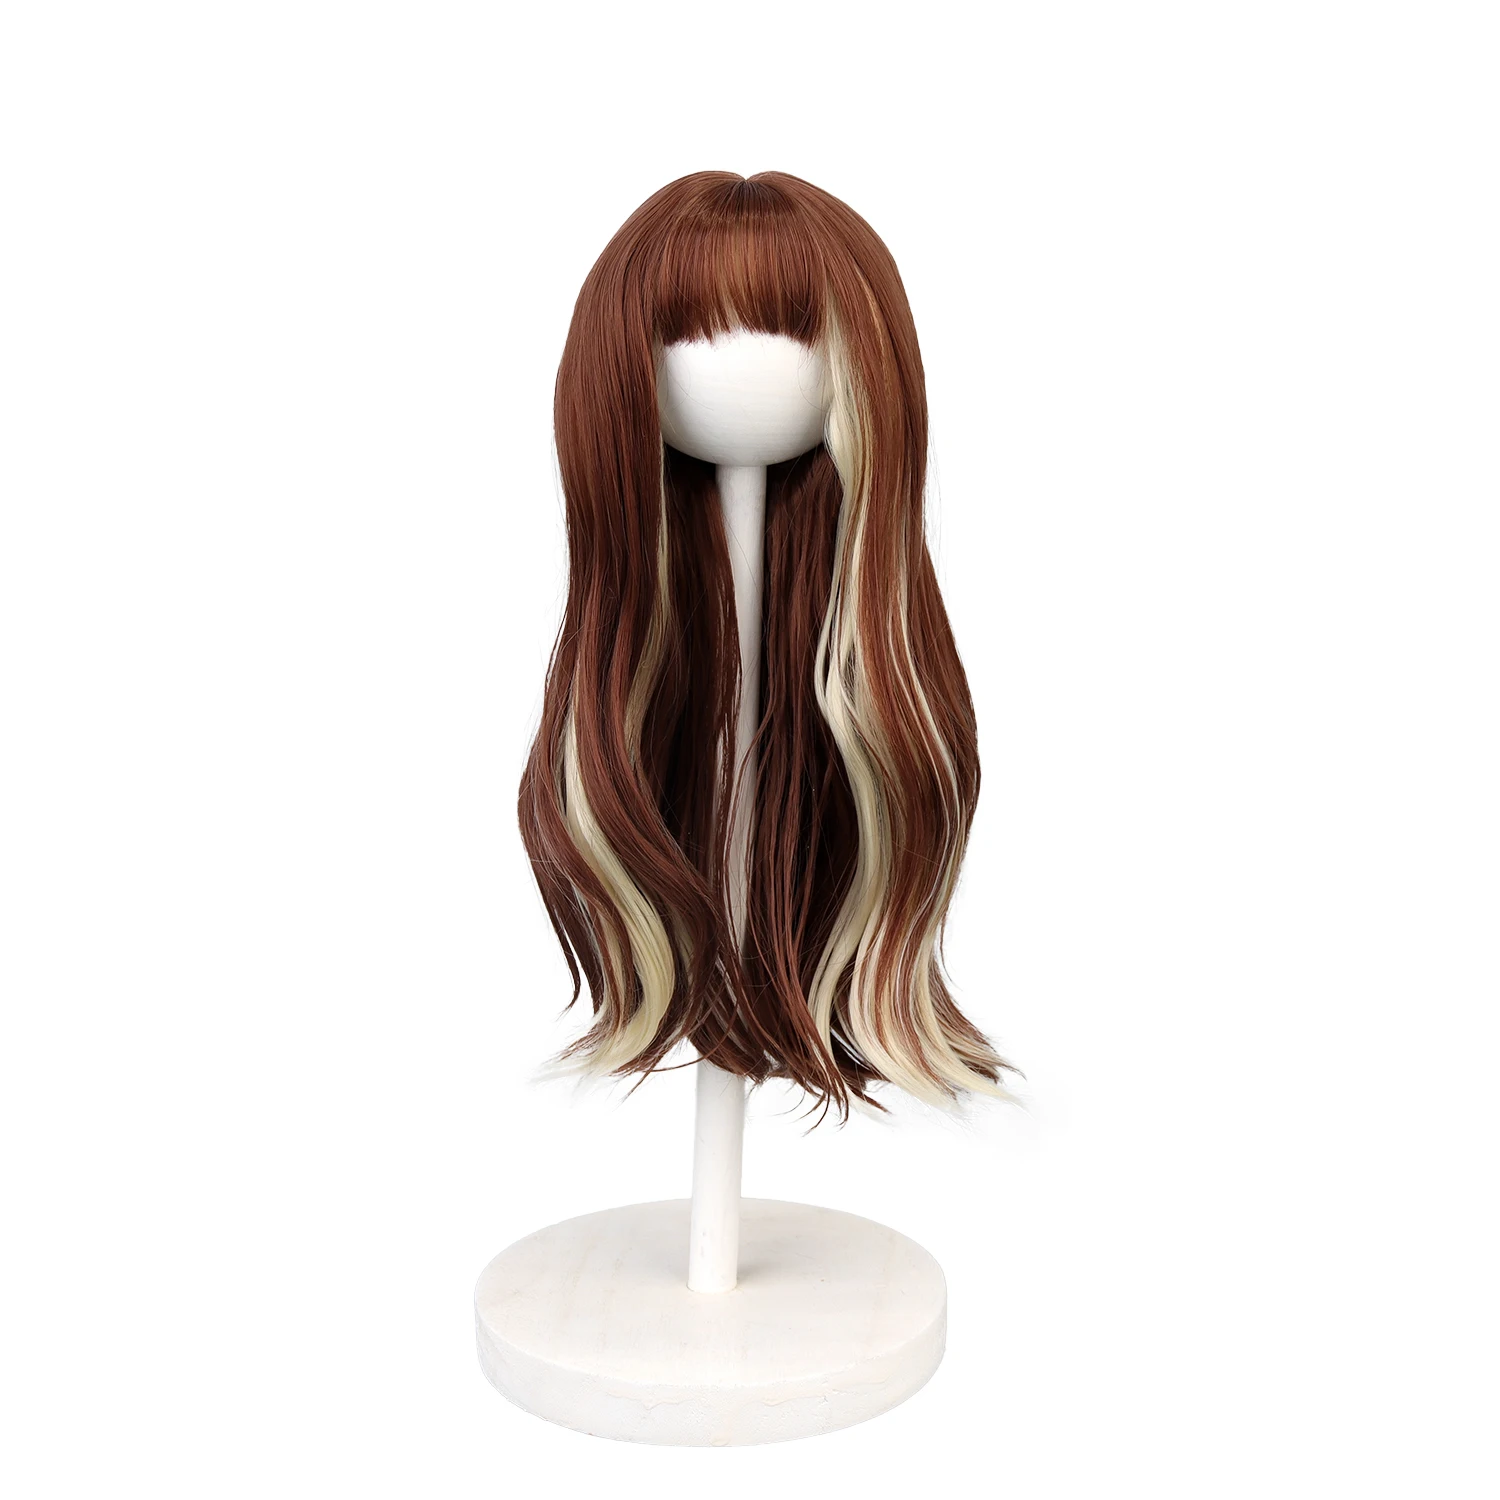 18 Inch American Doll Wigs 27cm Head Circumference Long Wavy Red Brown Blonde Highlight  High Temperature Hair For Doll Girls htd 8m synchronous belt has a circumference of 1728mm 1976mmmm width of 15 20 25 30 40 50mm high torque rubber synchronous belt